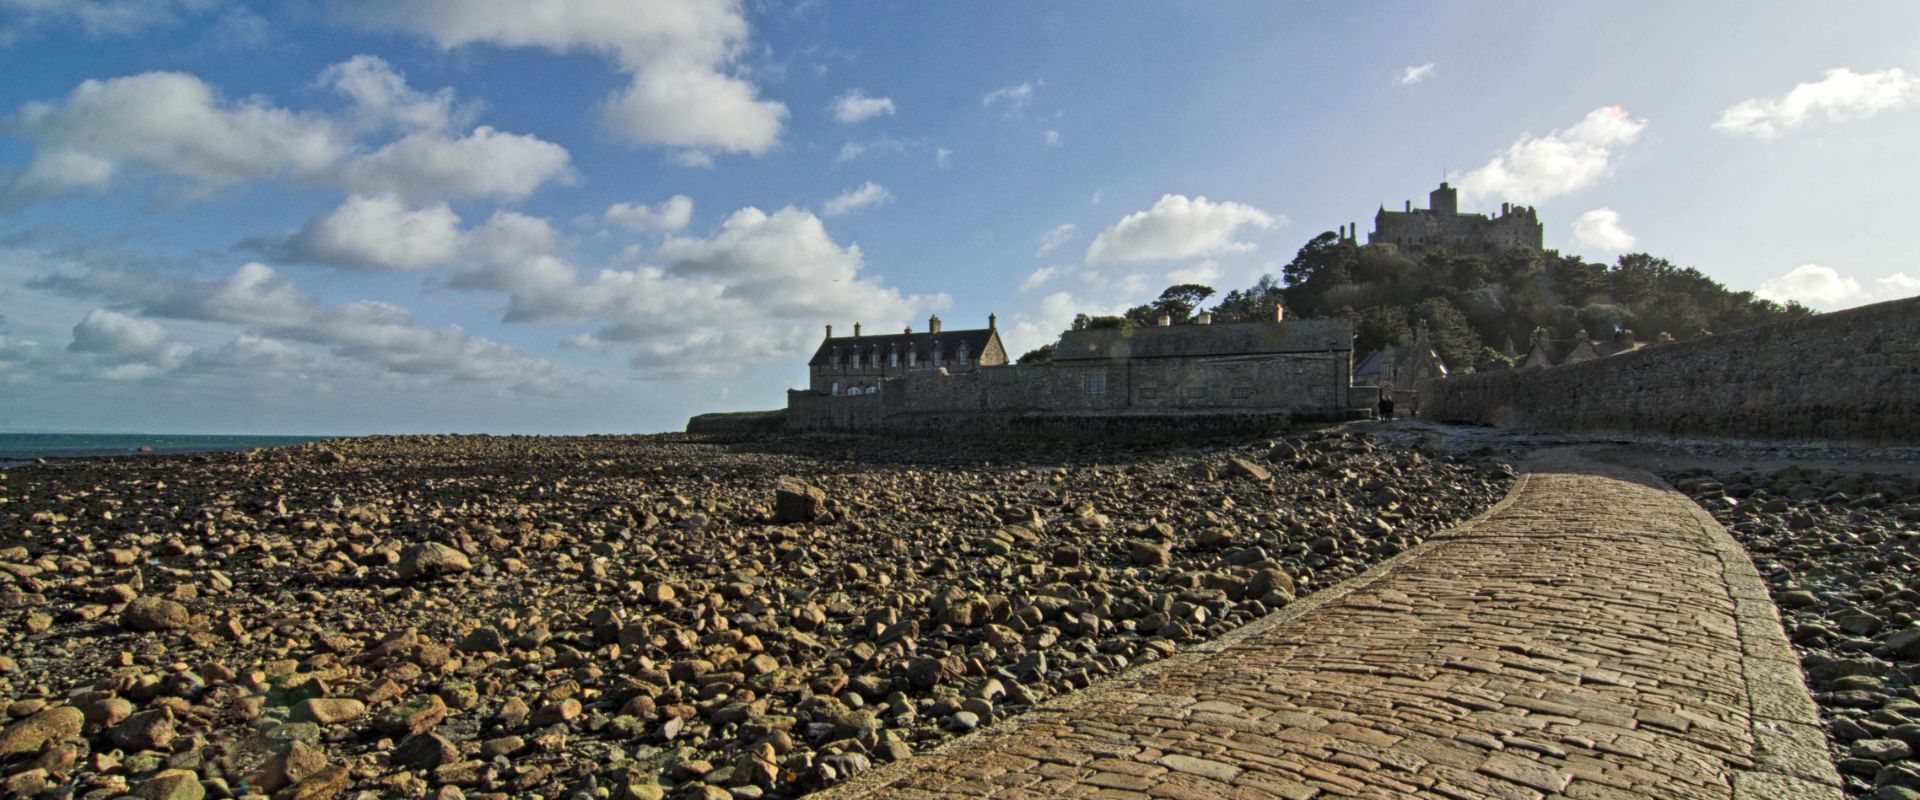 The tidal causeway leading to St. Michael's Mount in Cornwall